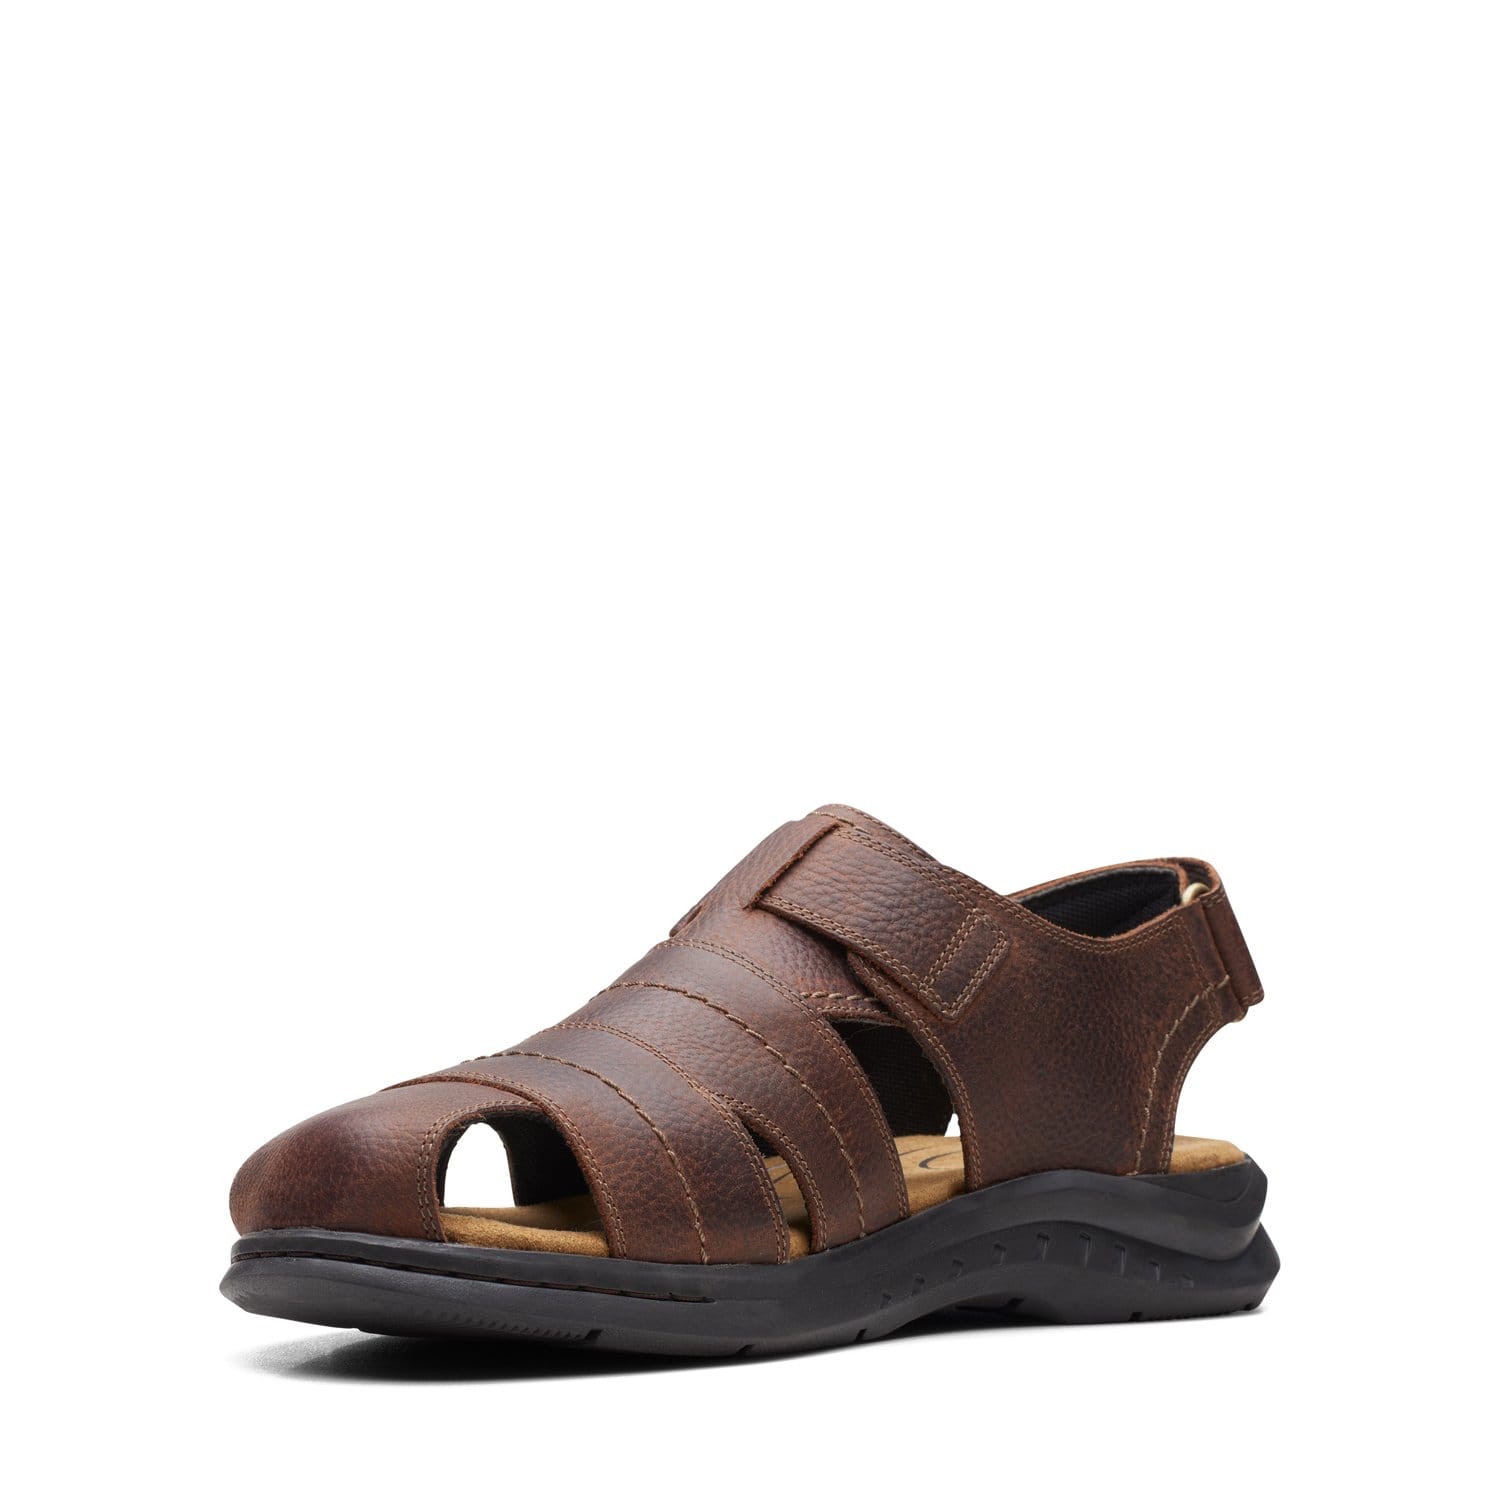 Clarks Hapsford Cove - Sandals - Brown Tumbled - 261580137 - G Width (Standard Fit)